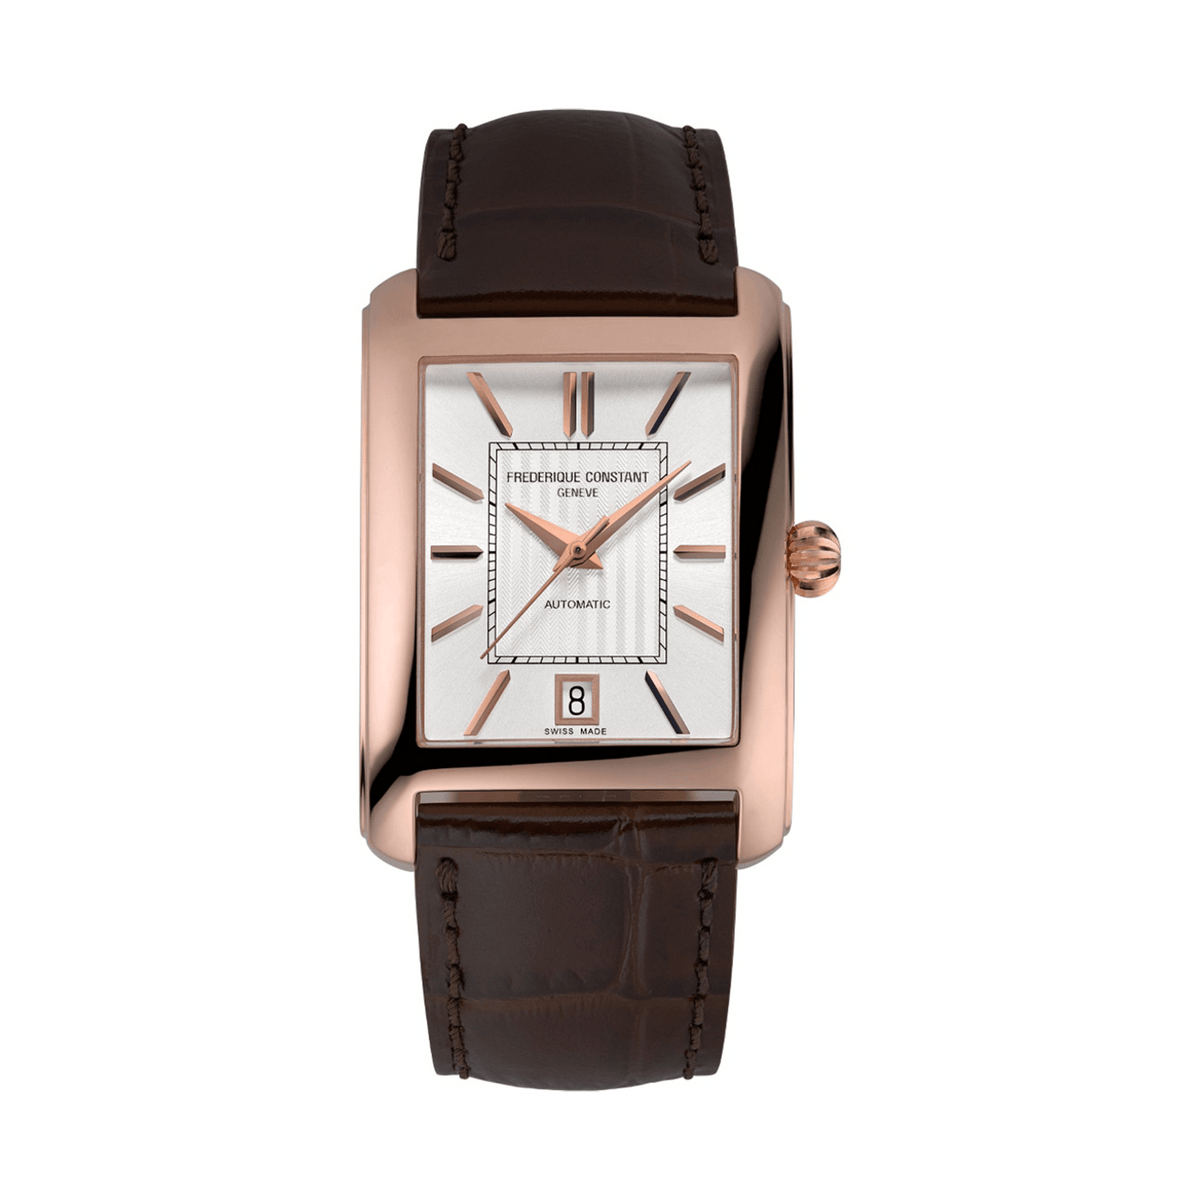 Frederique Constant Men's 30mm Stainless Steel Automatic Watch FC-303V4C4 - Wallace Bishop